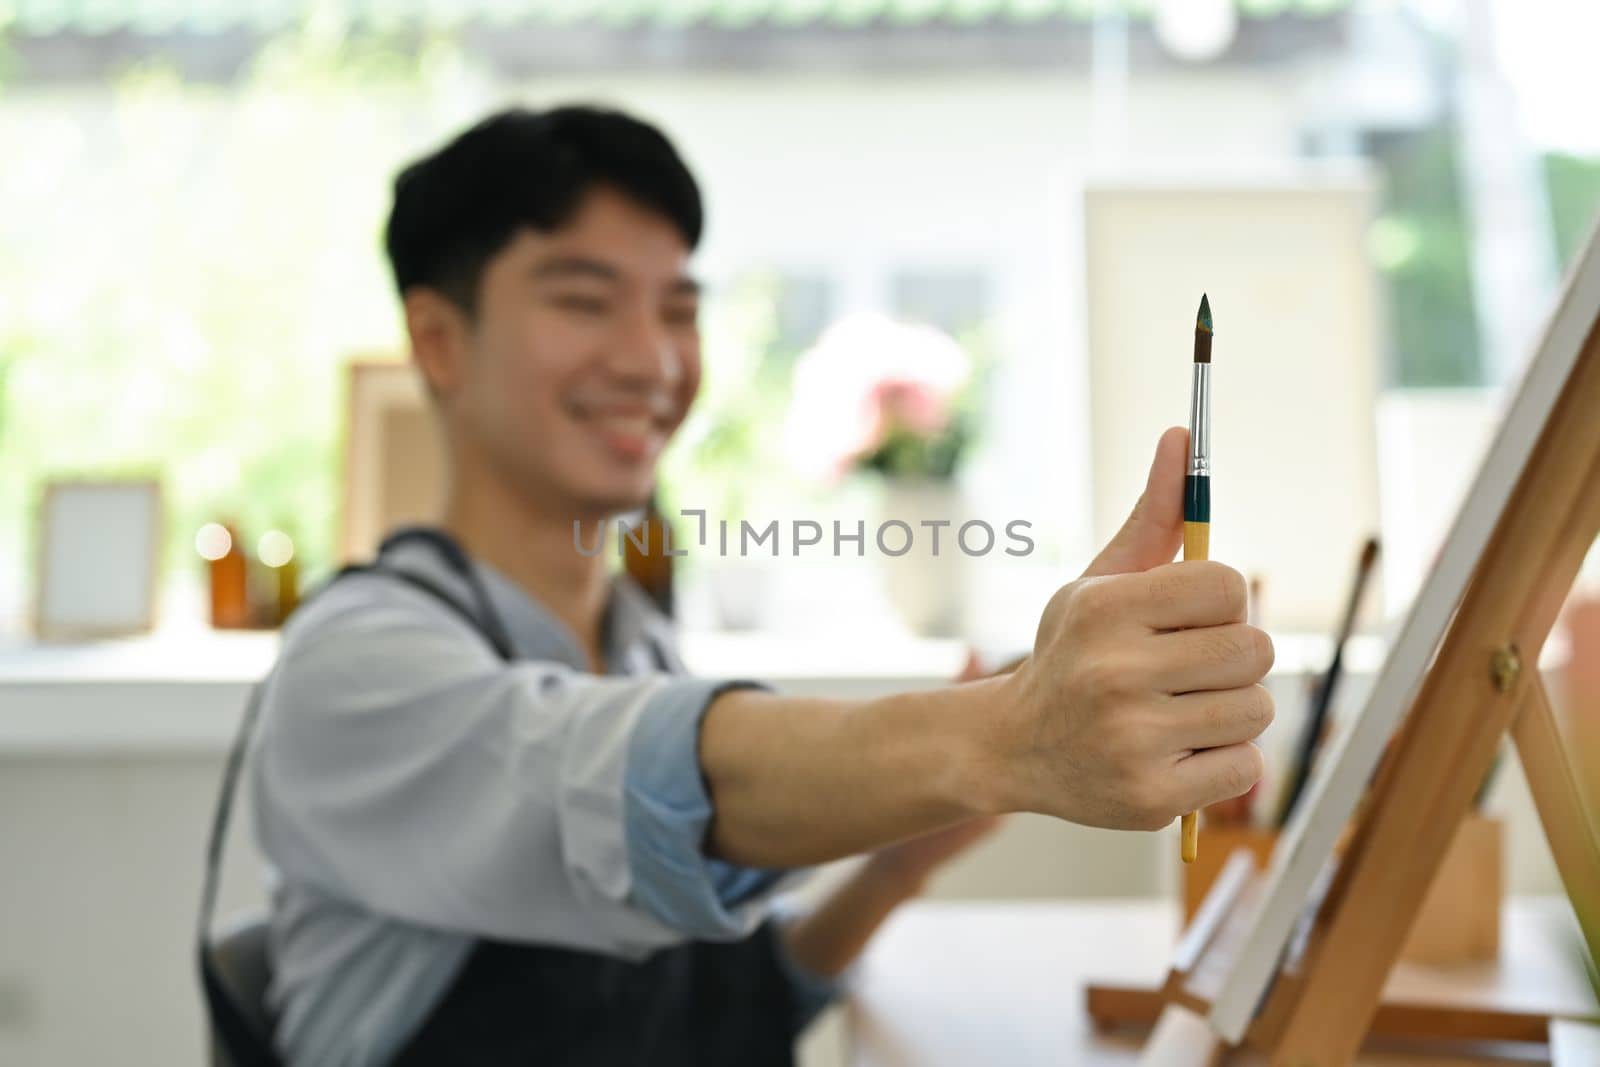 Image of pleased man artist painting picture with watercolor on canvas in art workshop. Art, creative hobby and leisure activity concept.